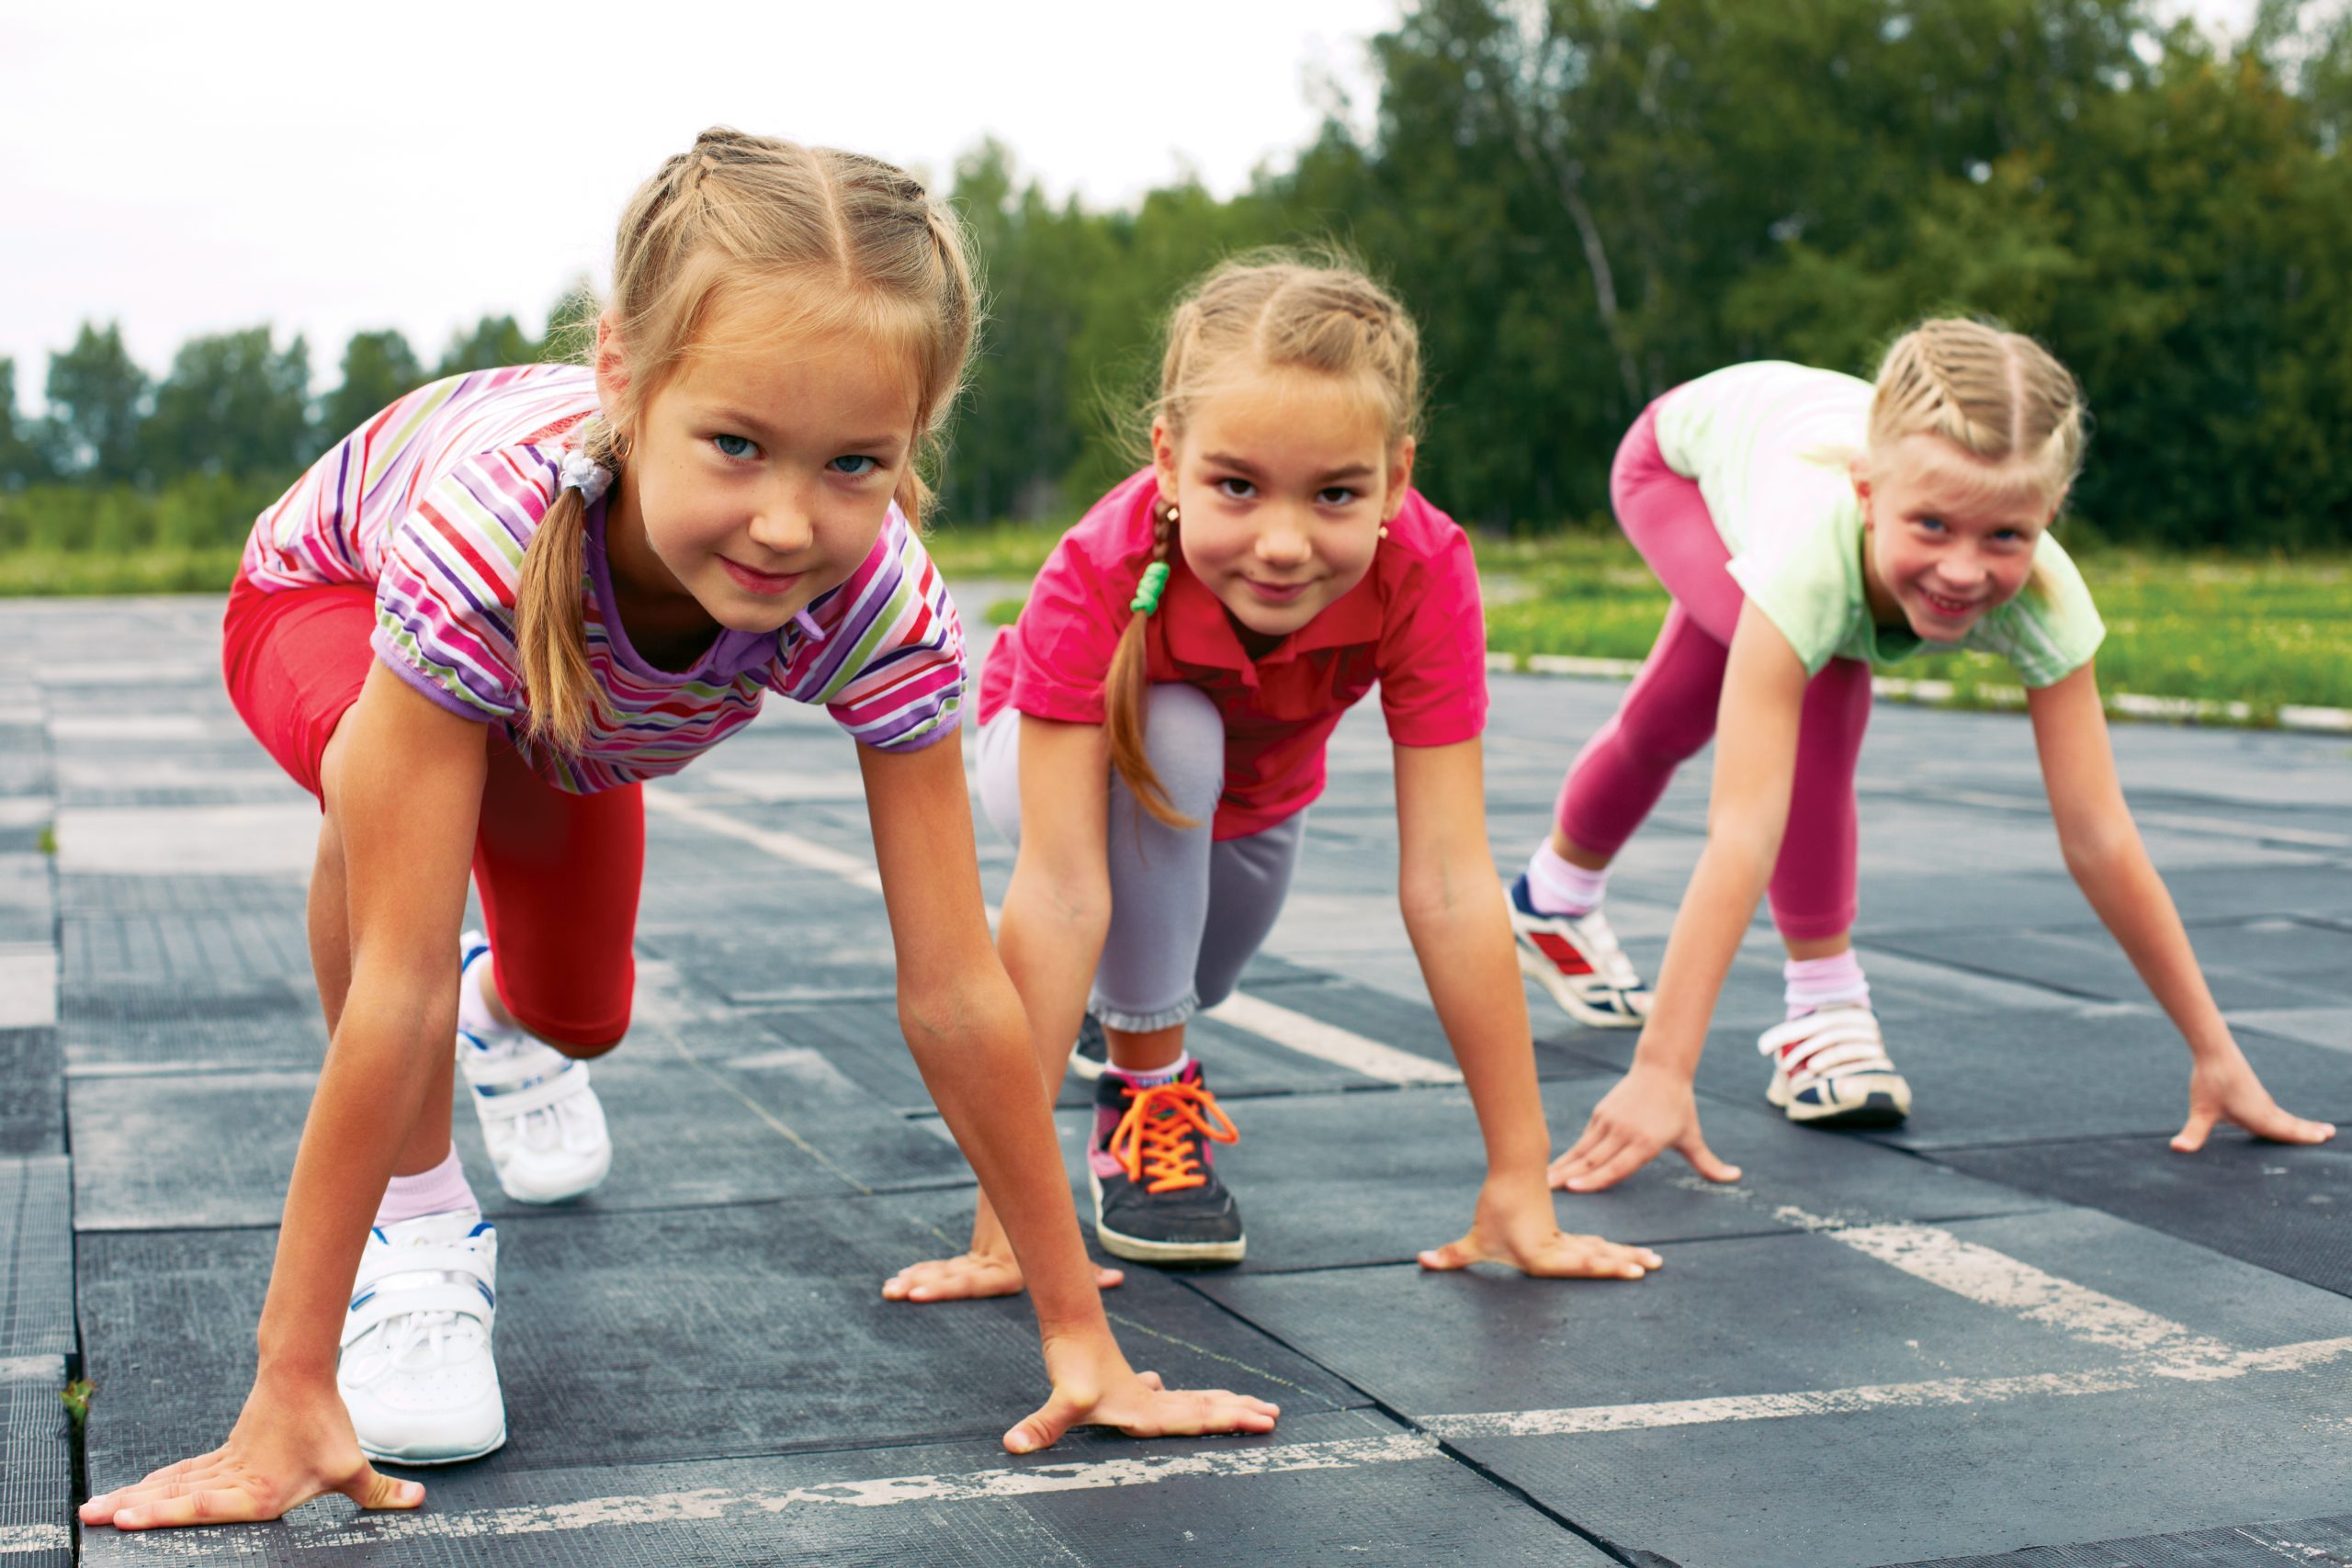 The Benefits of Youth Sports in Child Development